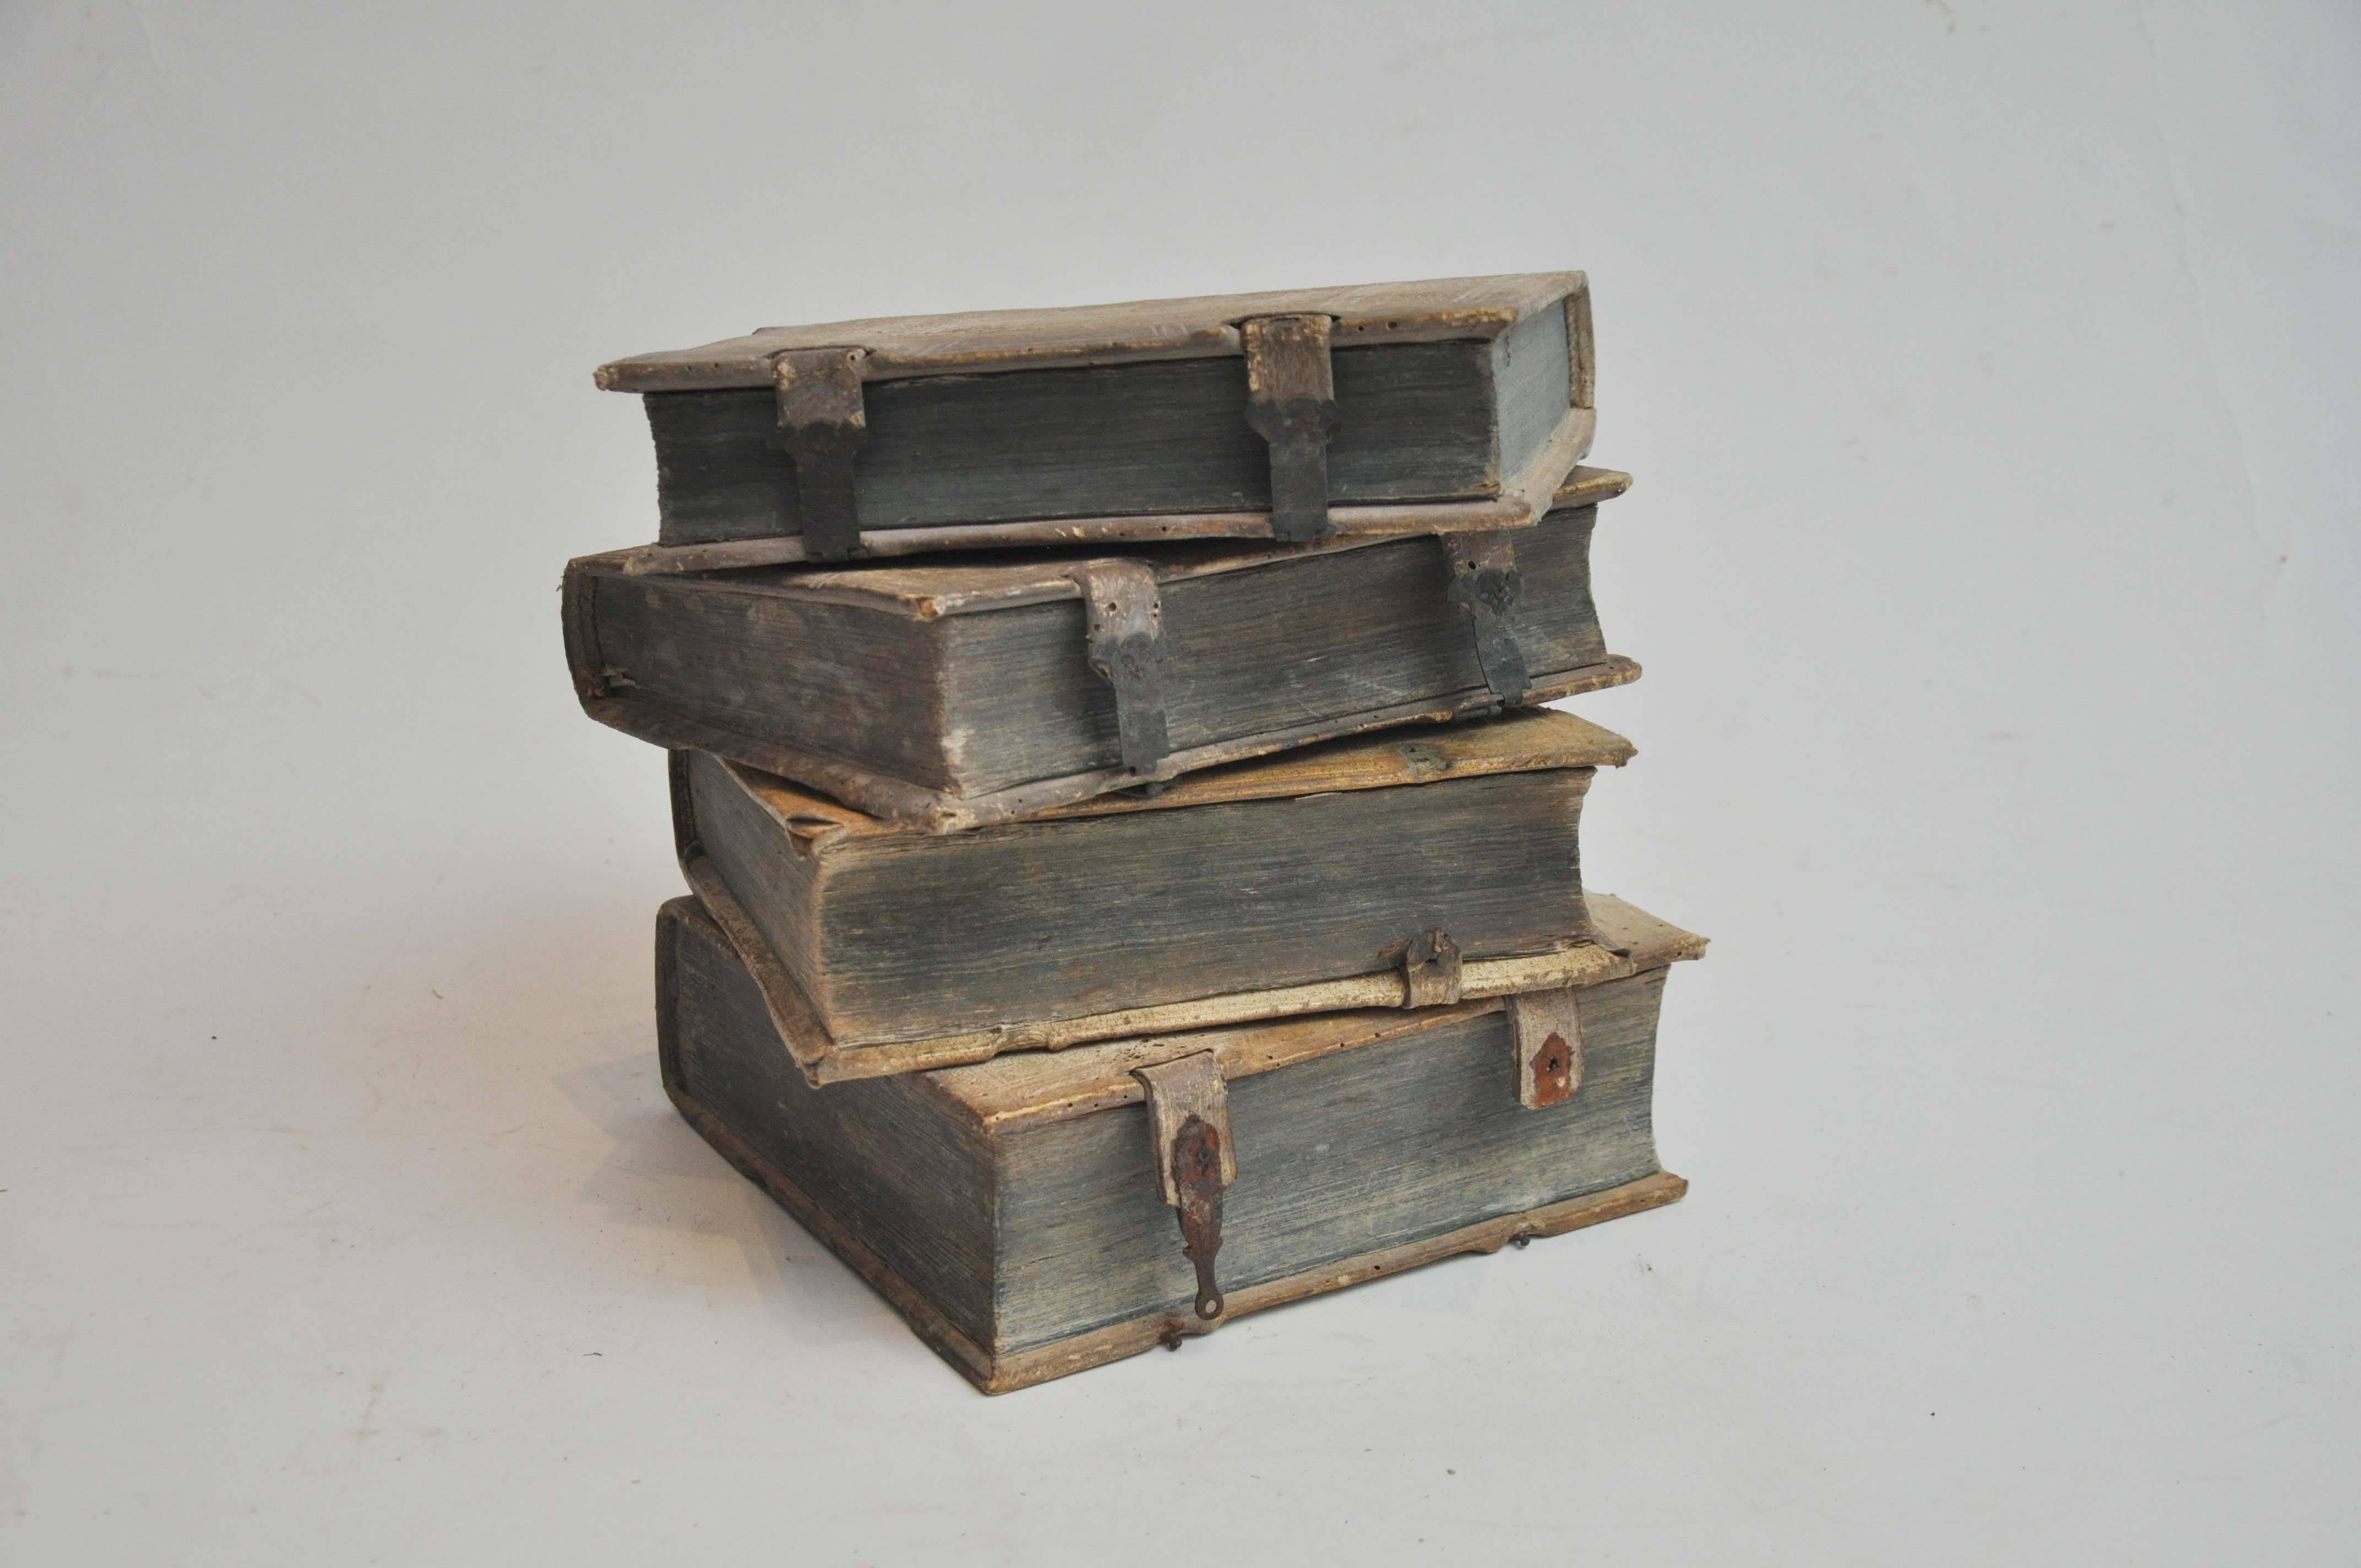 17th Century Collection of Four Rare European Vellum Books with Buckles Books found in Germany. 

These books have aged beautifully with exquisite patina and dark teal page edges.

Vellum (derived from the Latin word vitulinum meaning 